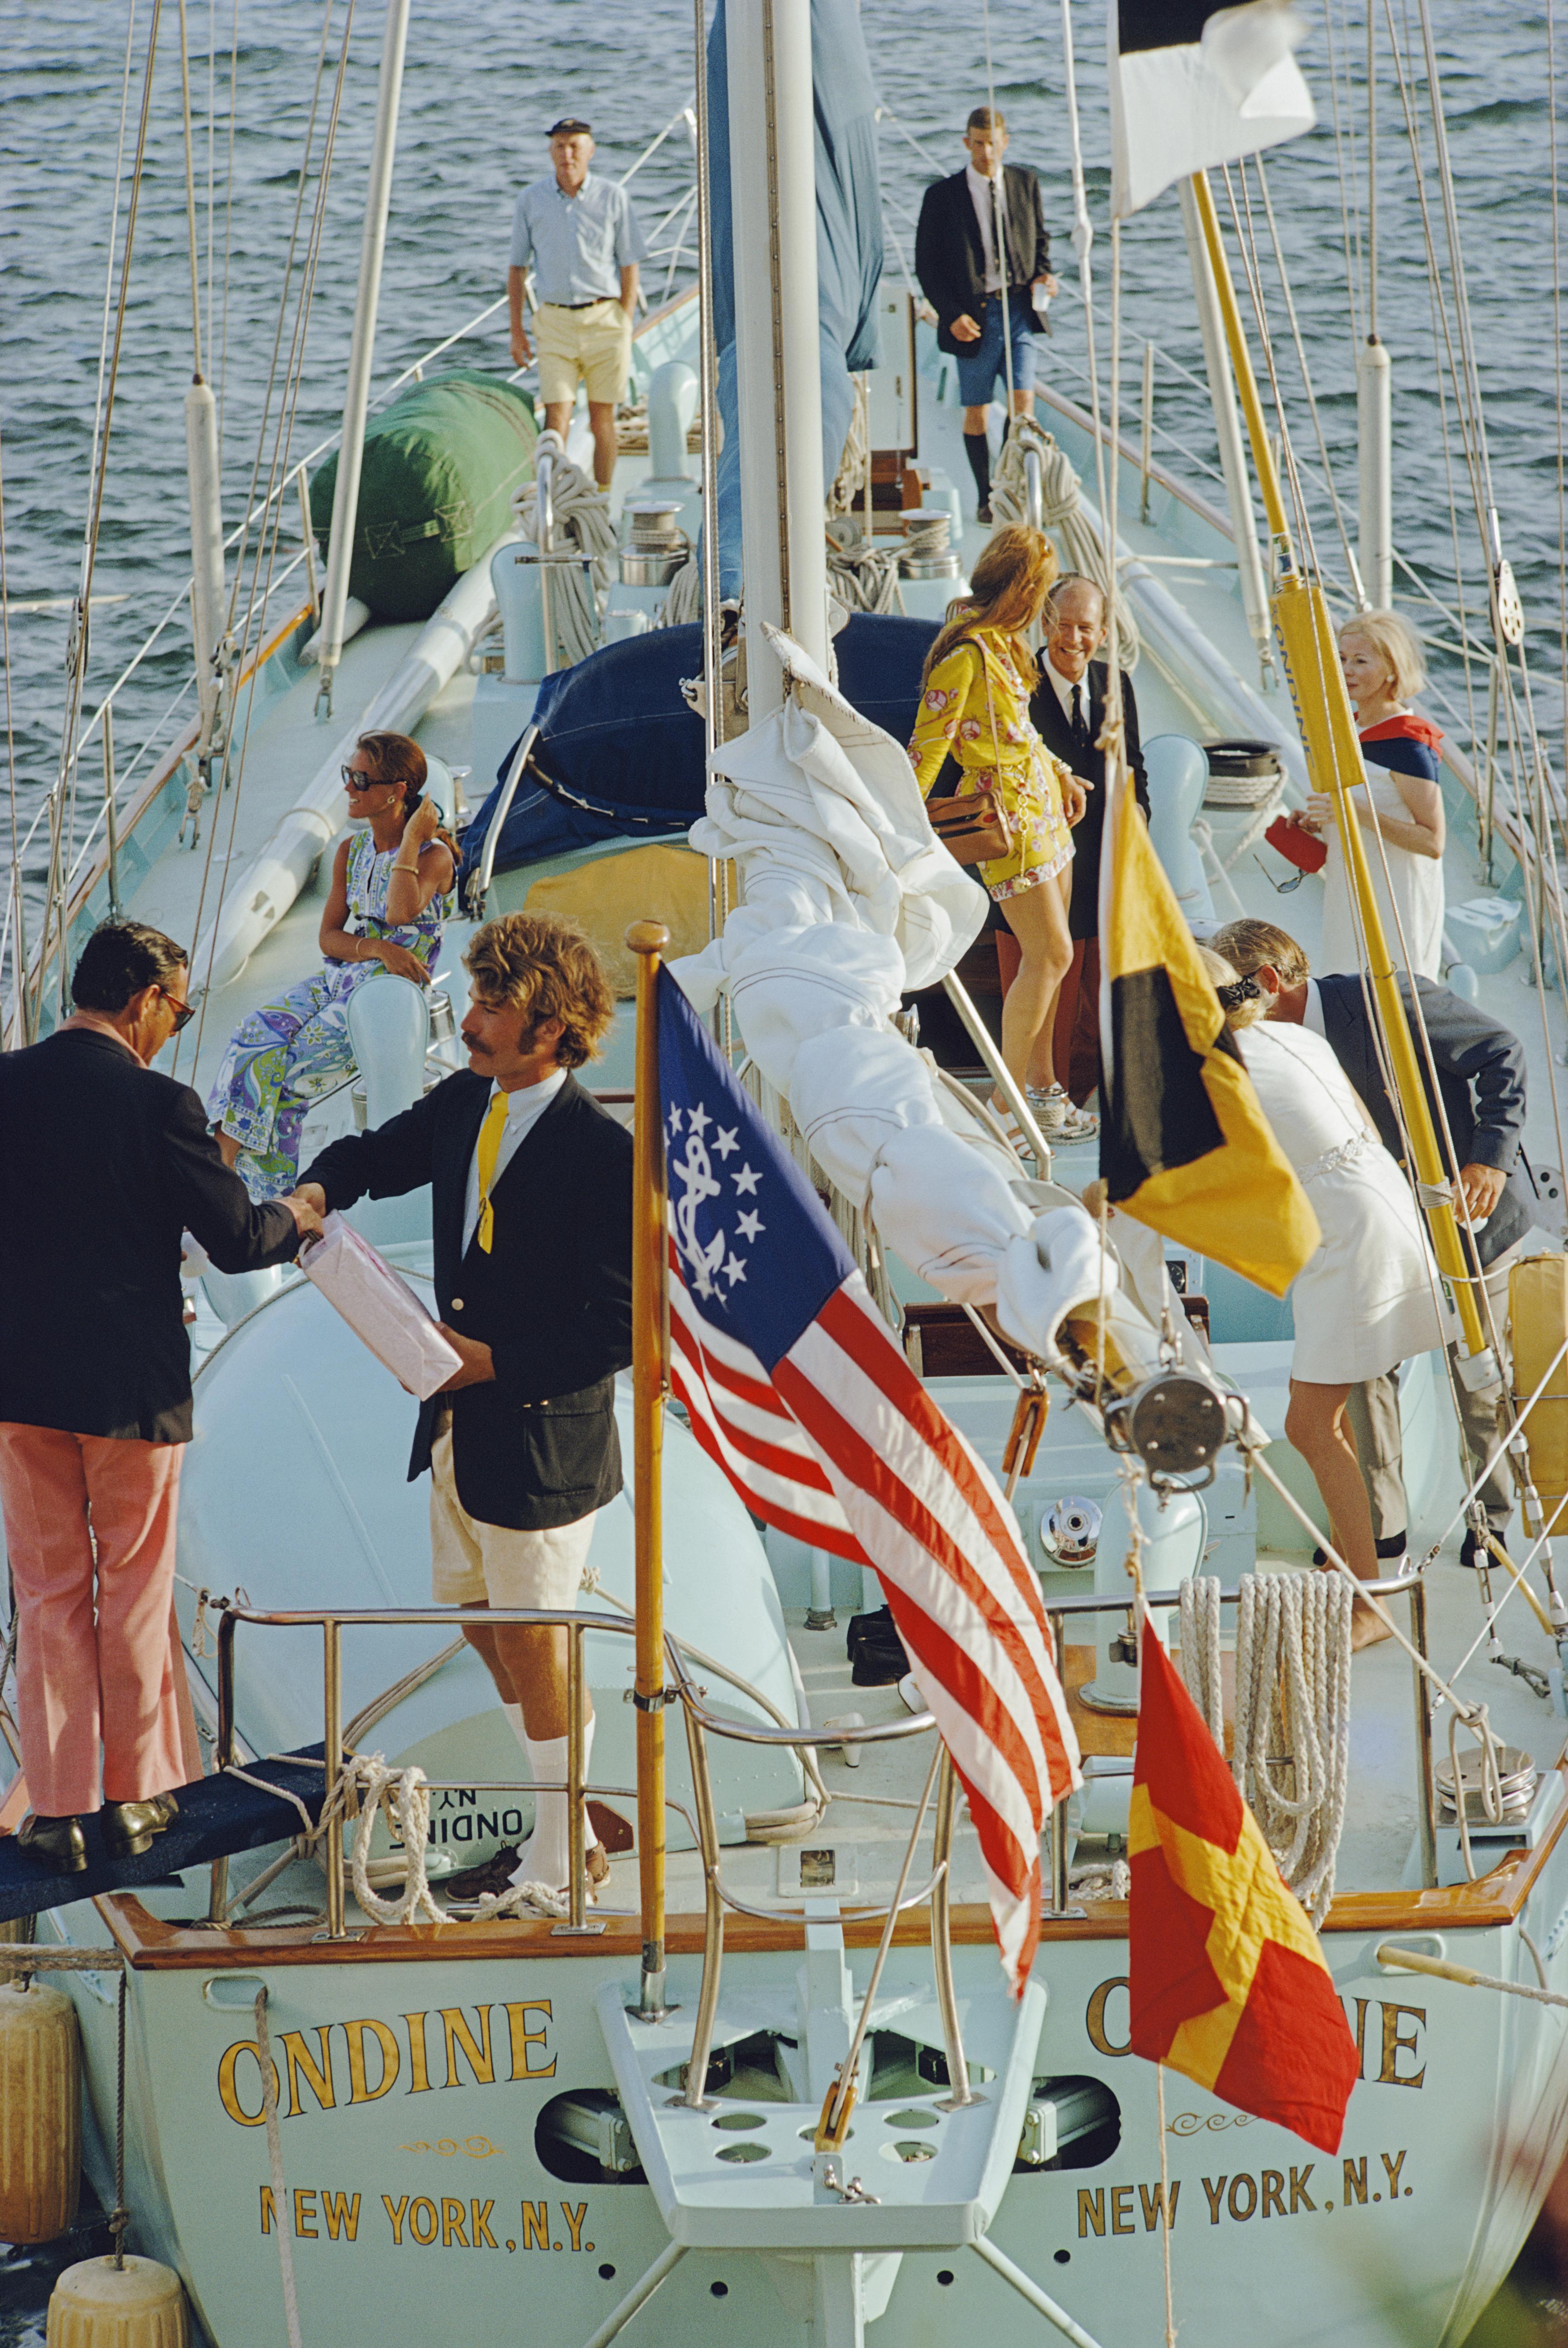 Slim Aarons Portrait Photograph - Party In Bermuda, Estate Edition, (1970 on the Yacht Ondine in yellow and red)